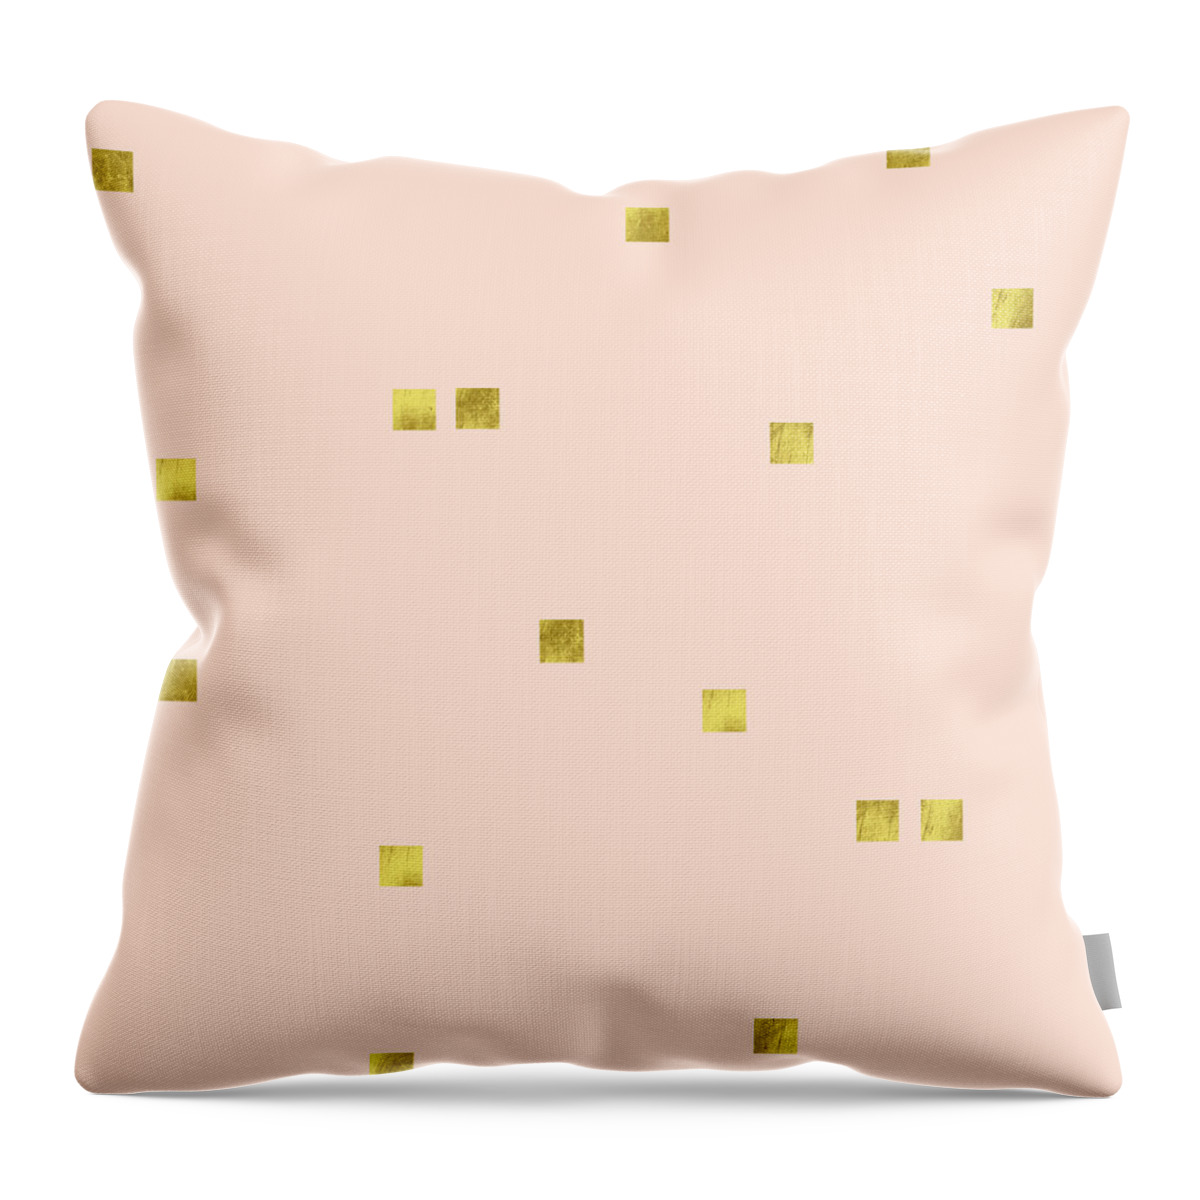 Minimalist Throw Pillow featuring the digital art Golden scattered confetti pattern, baby pink background by Tina Lavoie